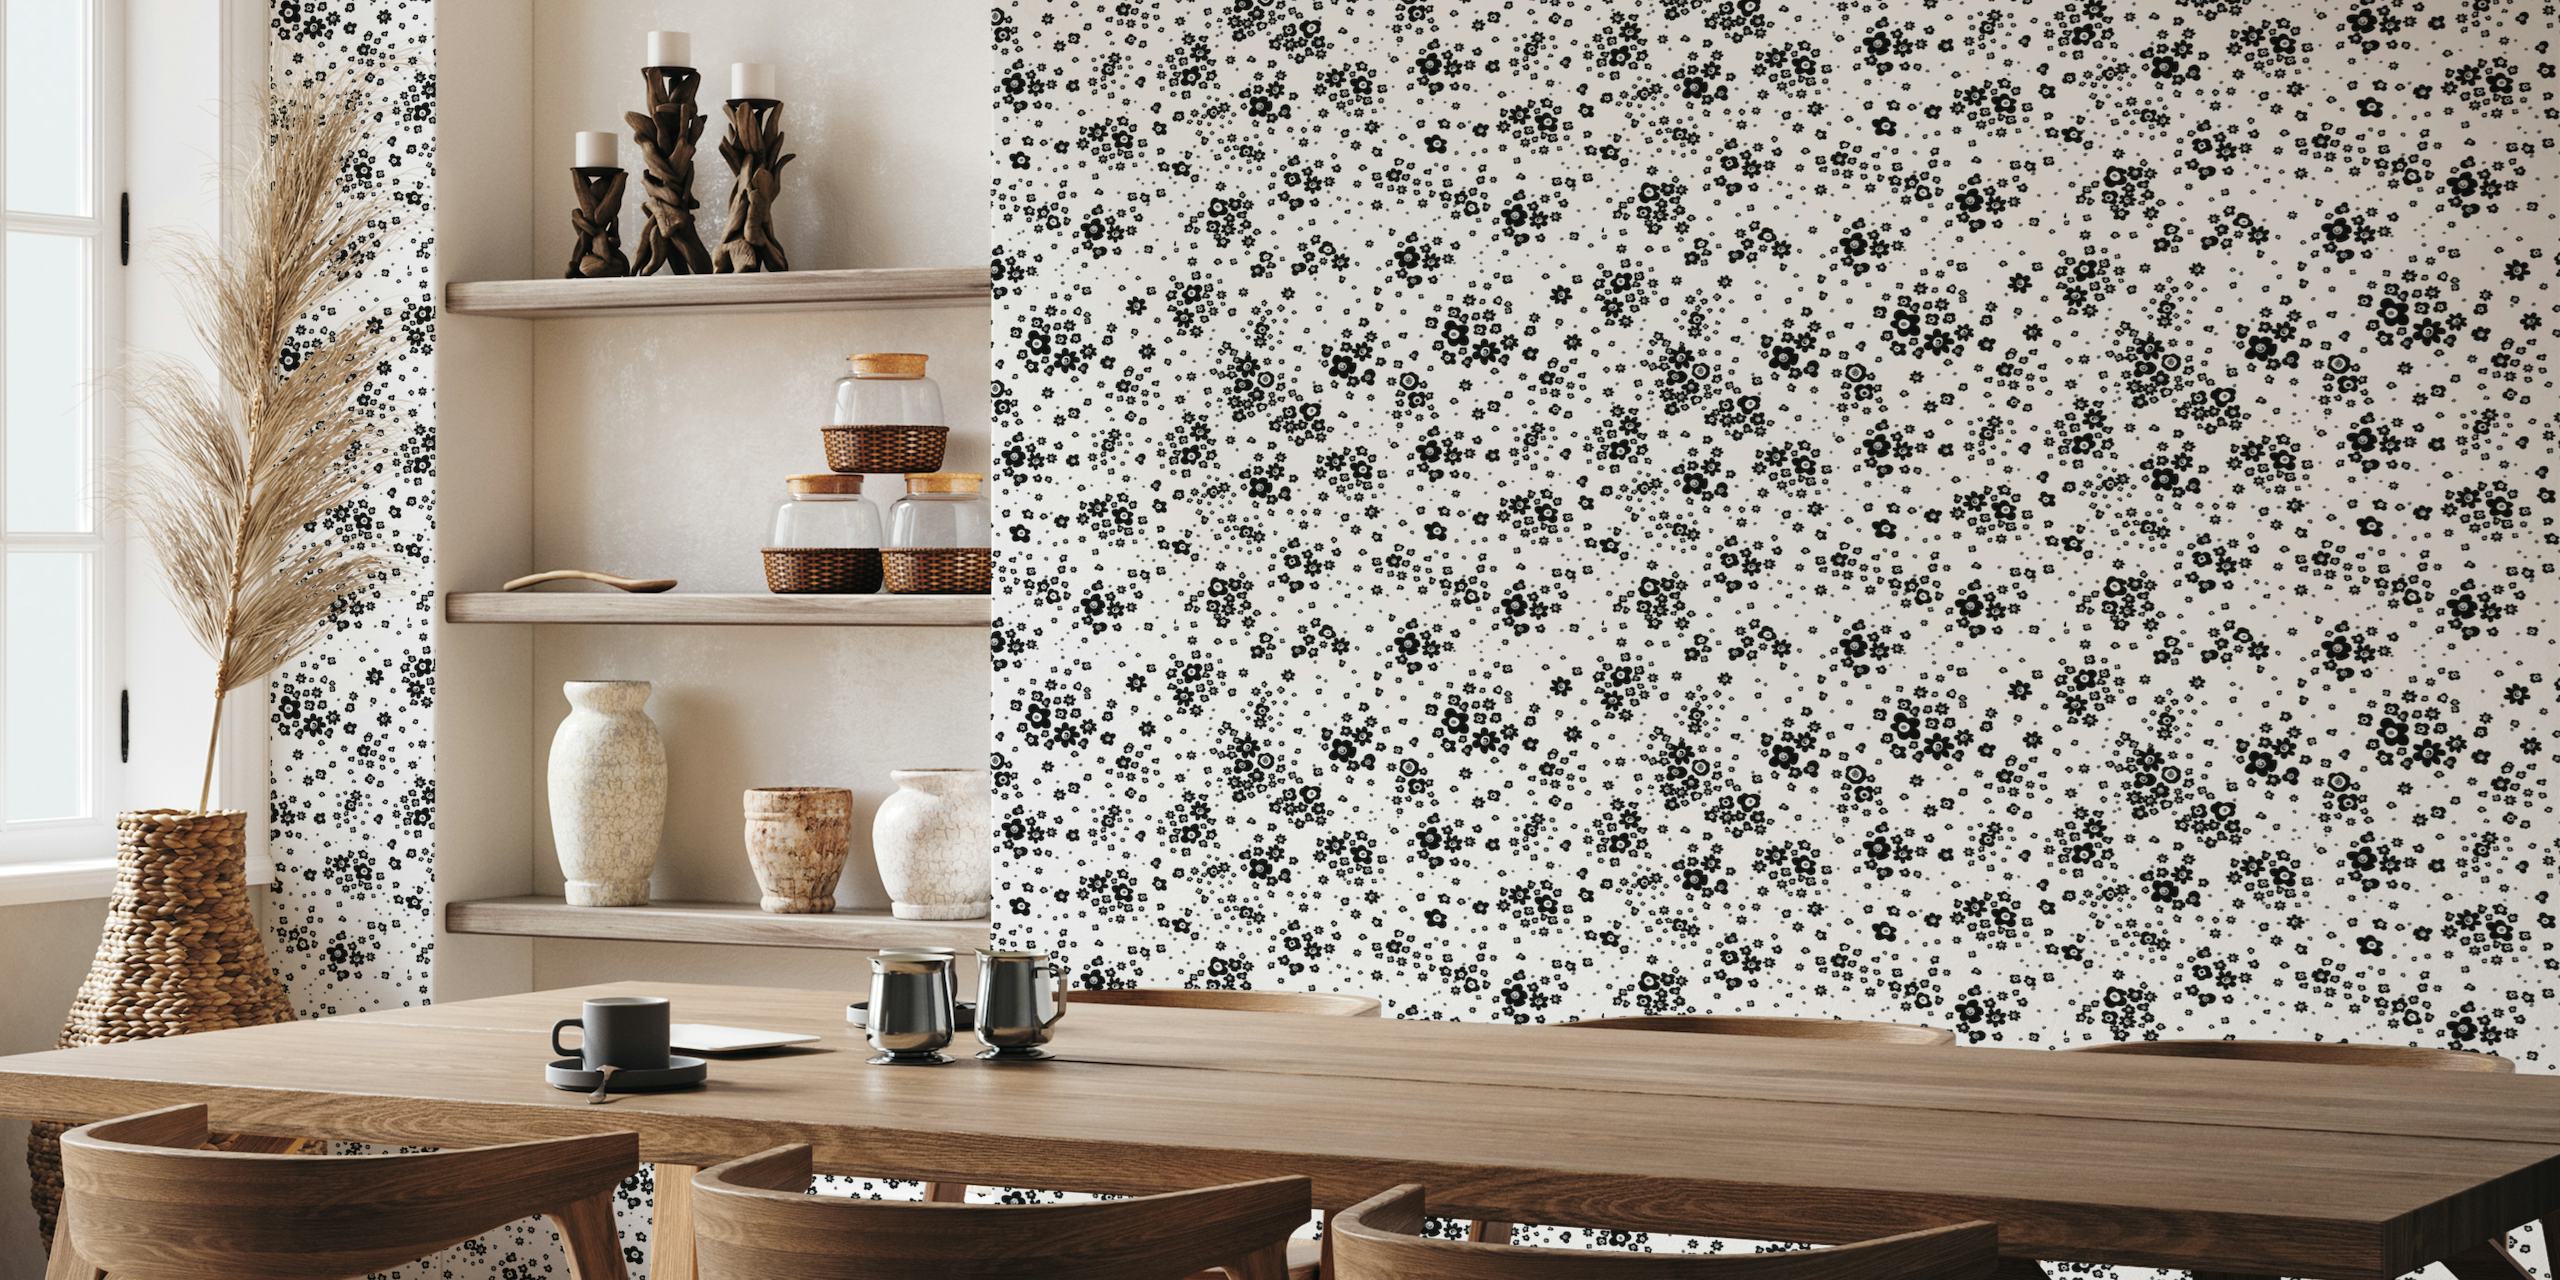 Black and white artistic wild ditsy flowers pattern wallpaper